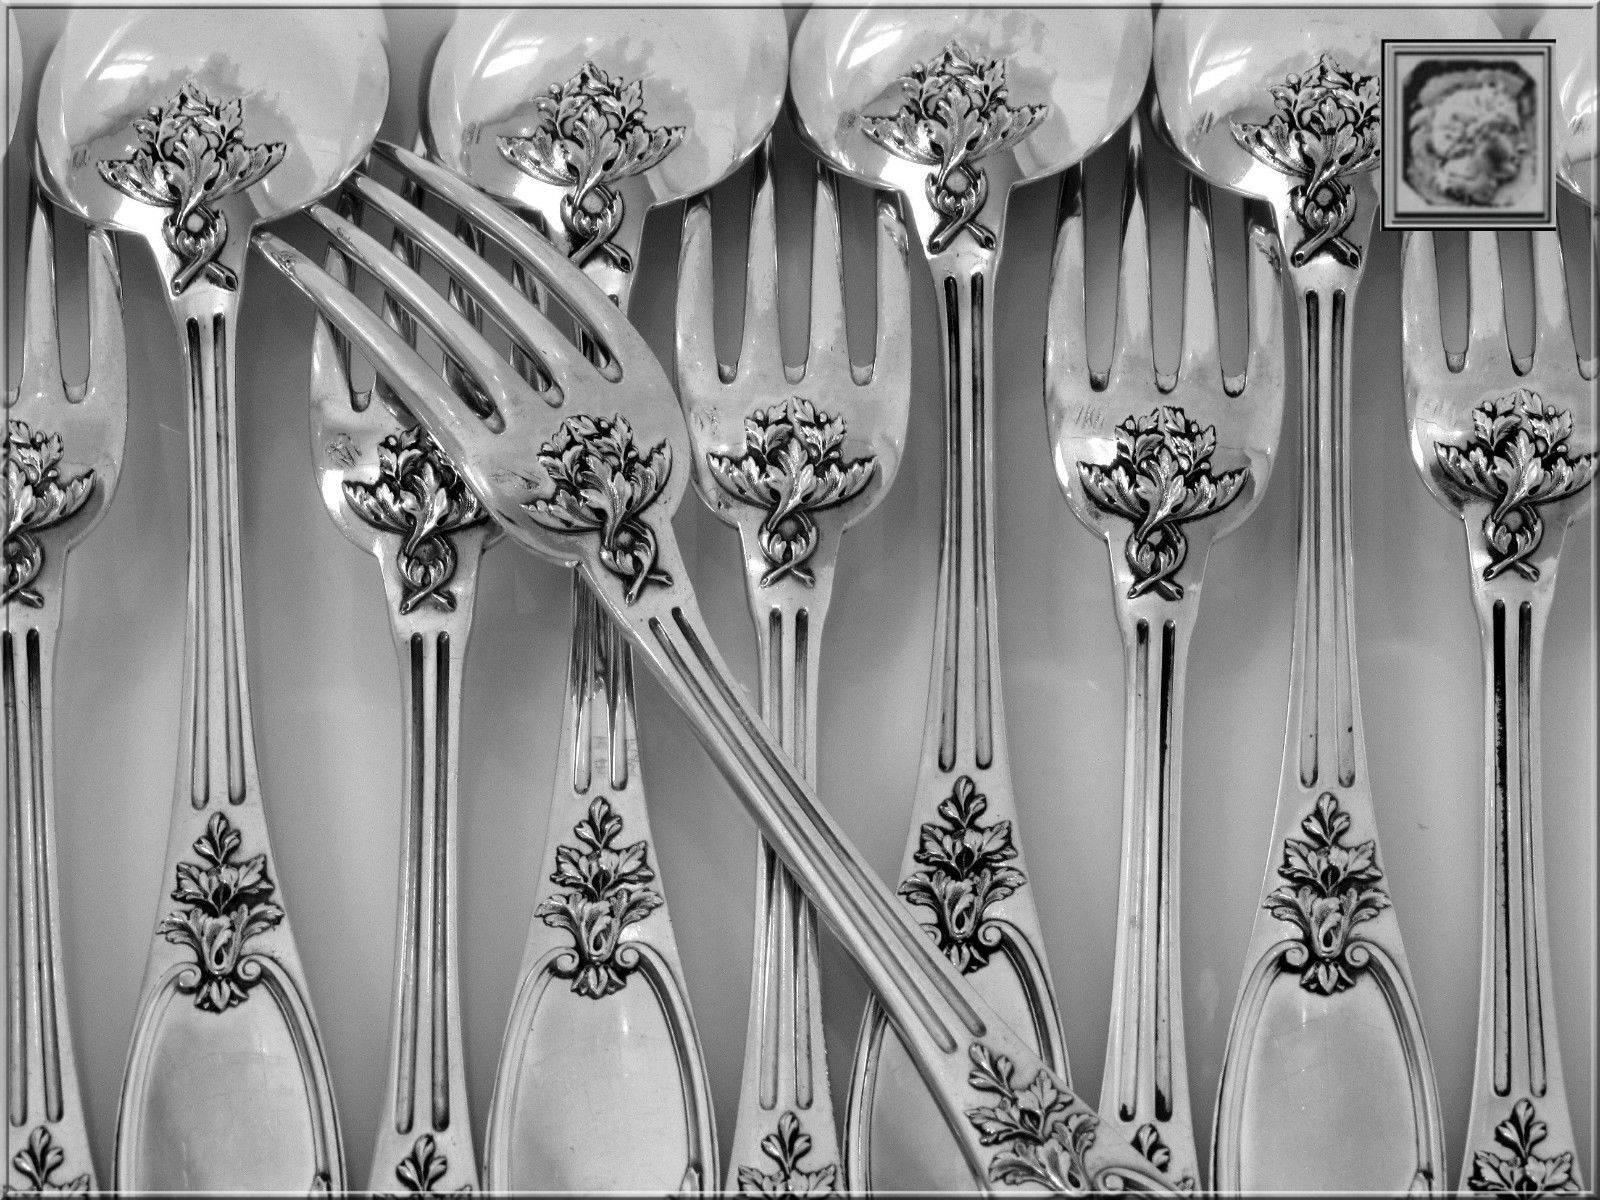 Henin French Sterling Silver Dinner Flatware Set of 12 Pieces, Neoclassical 5